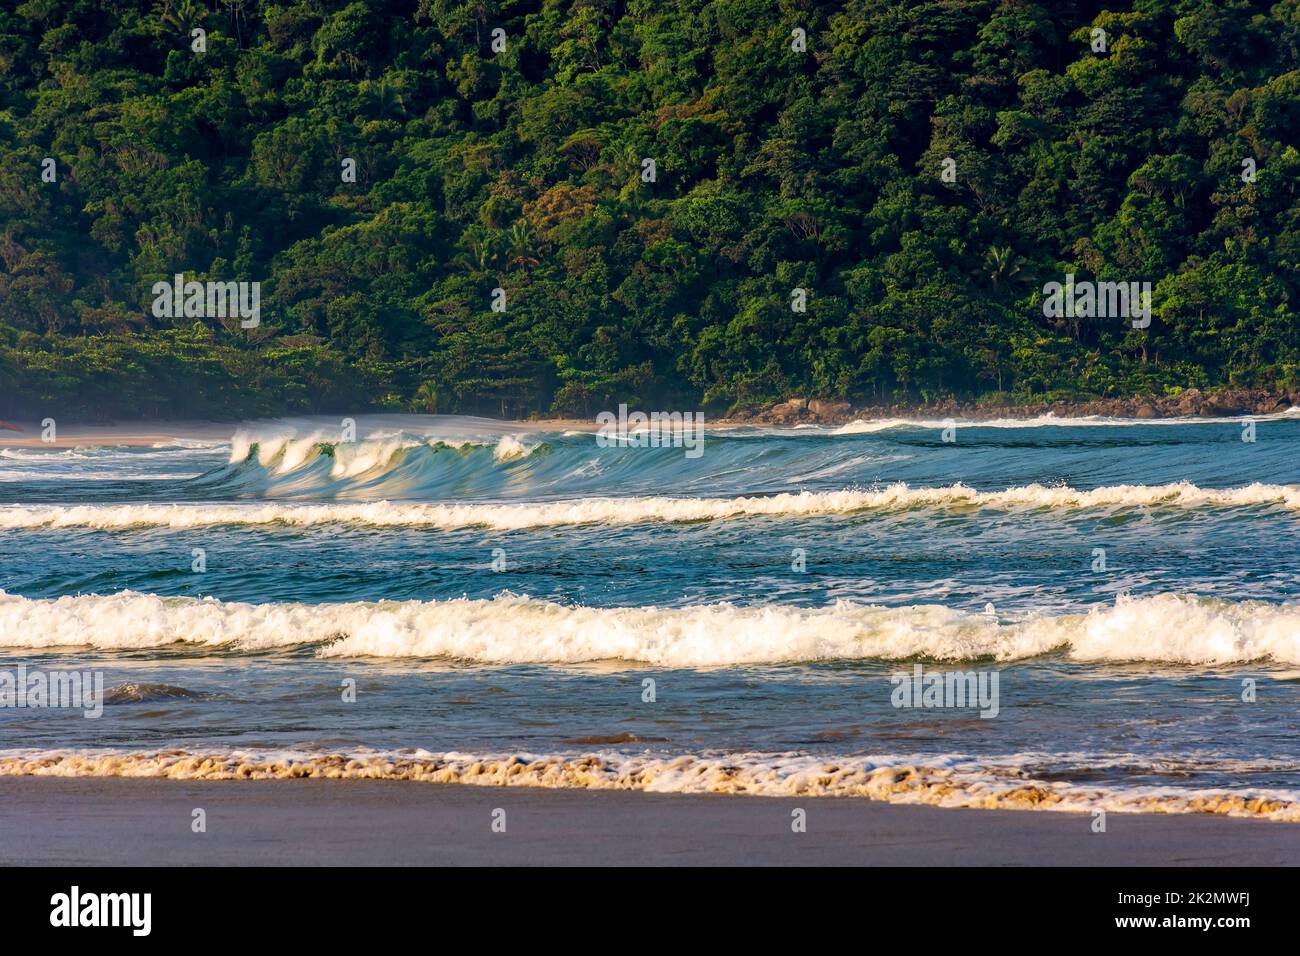 Untouched rainforest and hills behind the waves at White Beach in Bertioga Stock Photo